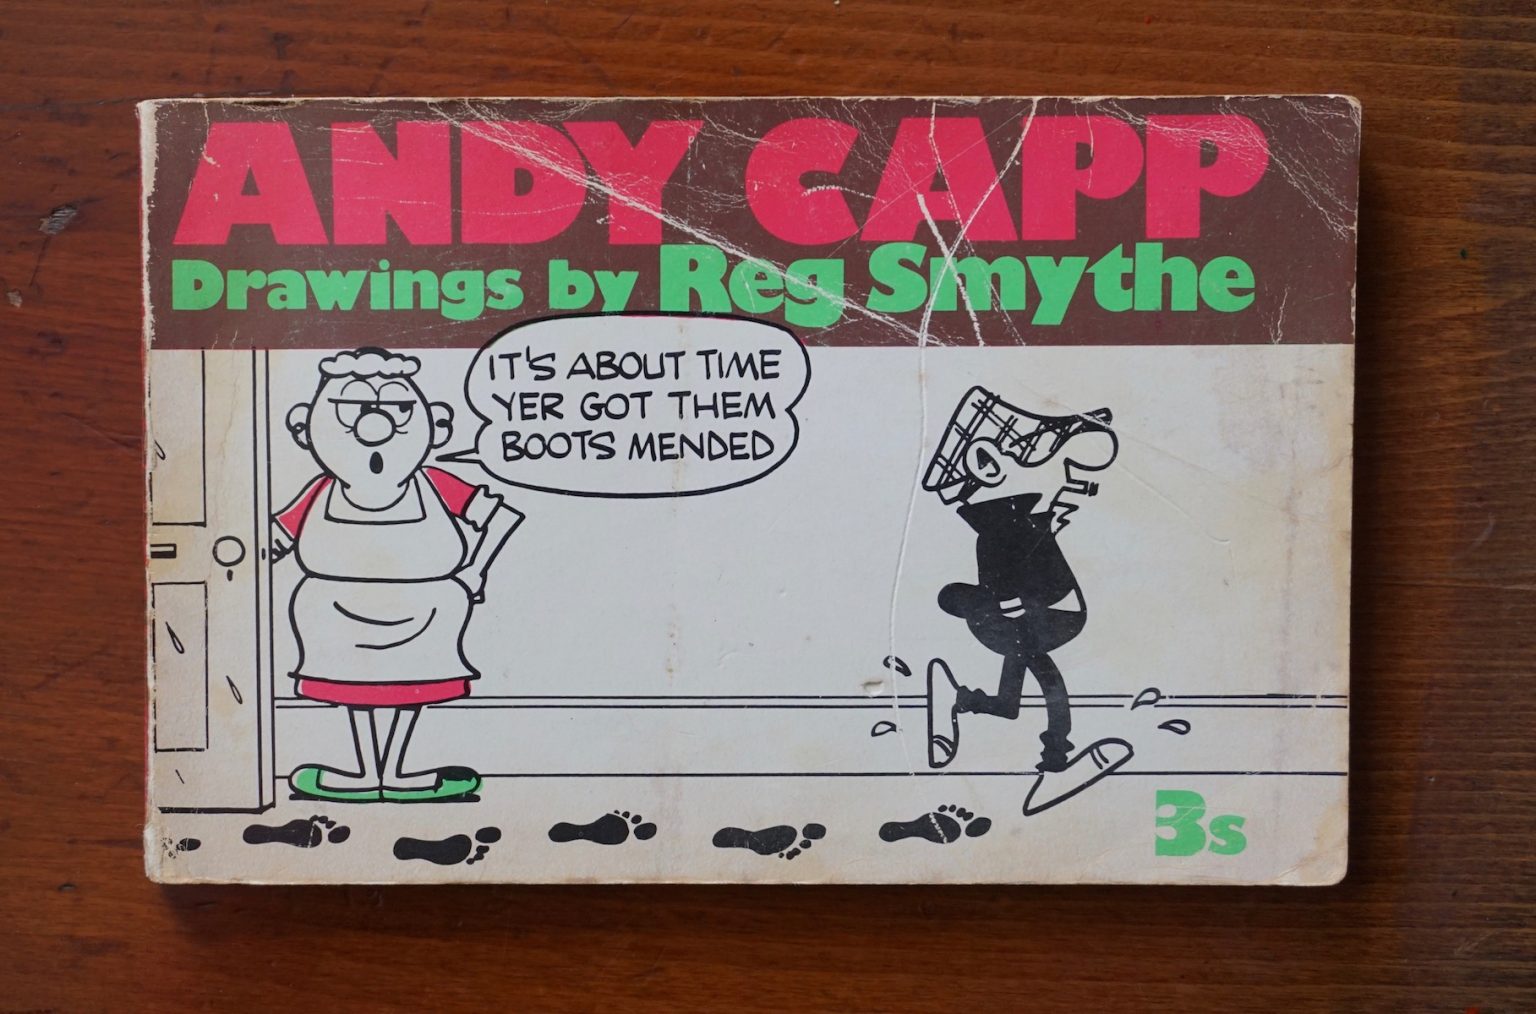 Andy Capp Drawing by Reg Smythe, 1967, number 19 • Antiche Curiosità